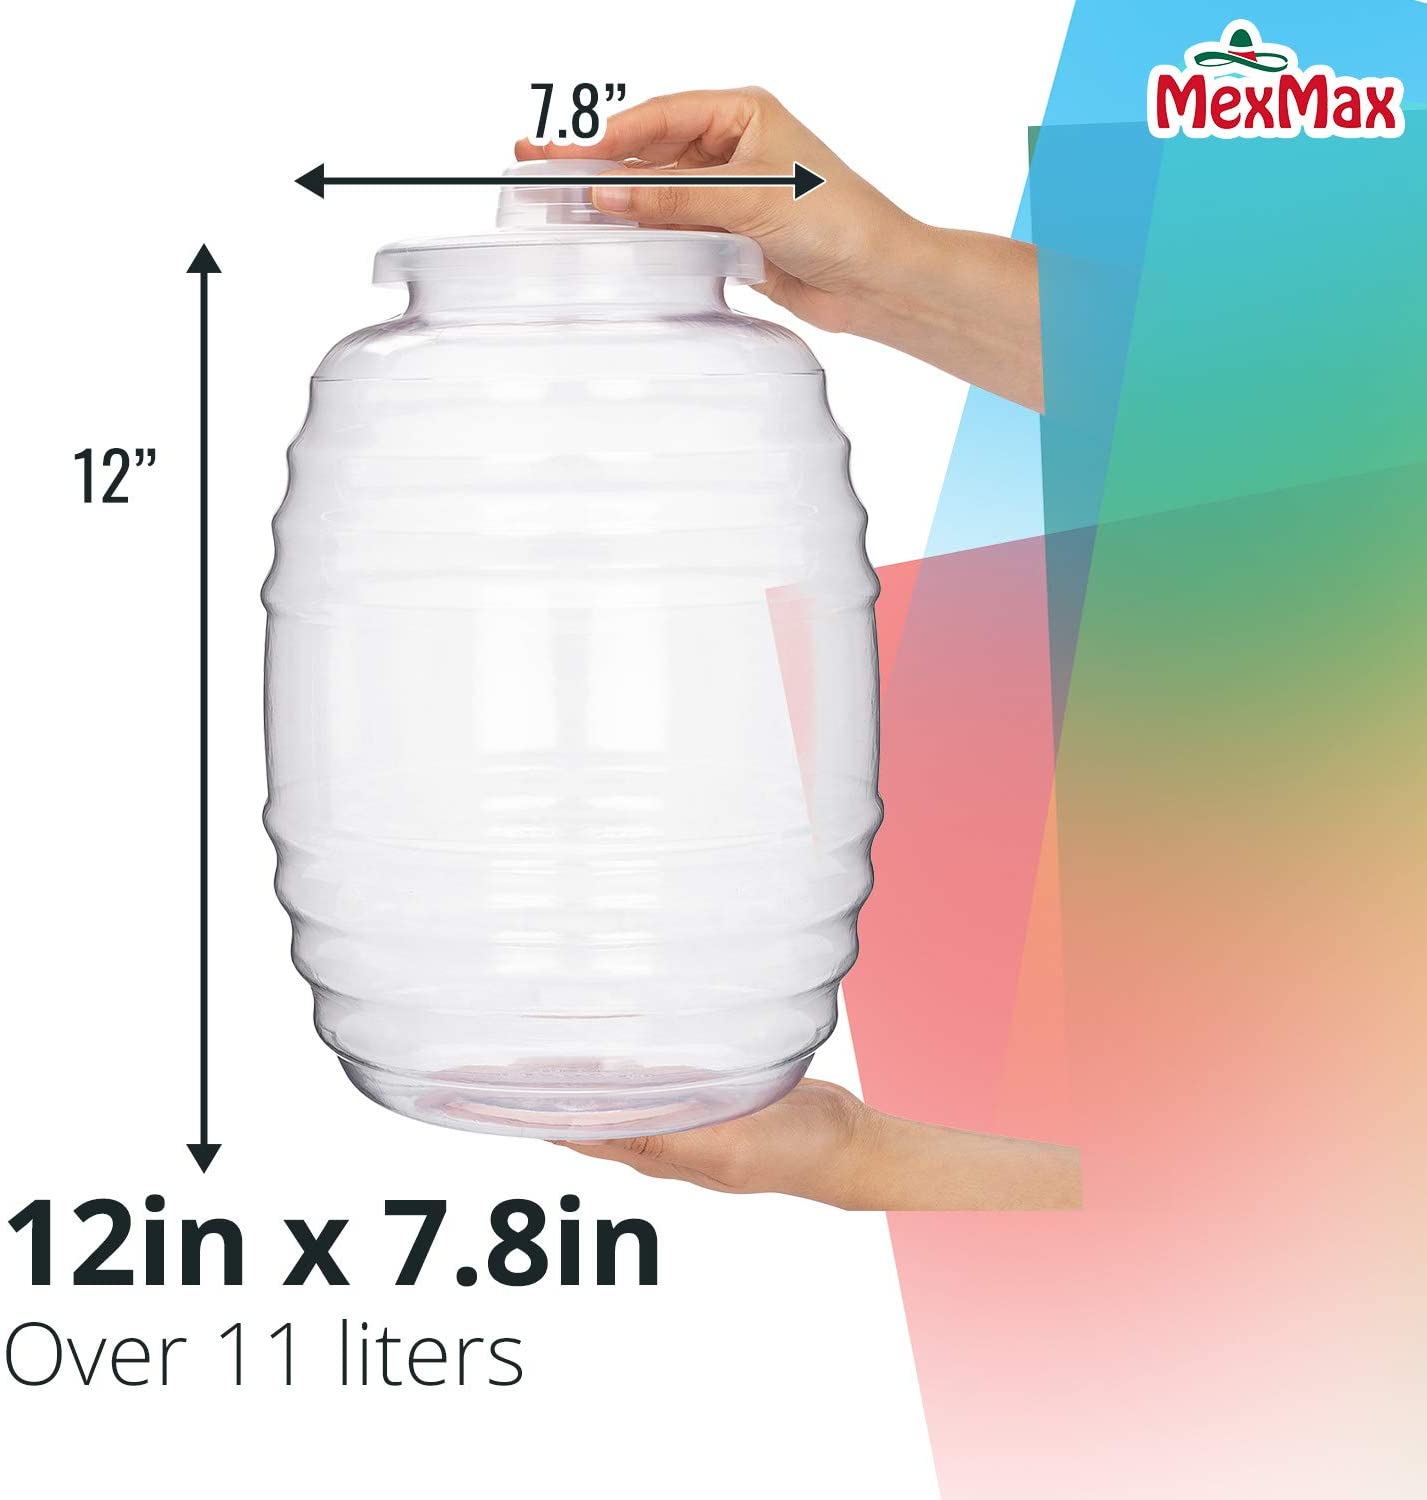 3 Gallon Plastic Beverage Dispenser with Stainless Steel Base